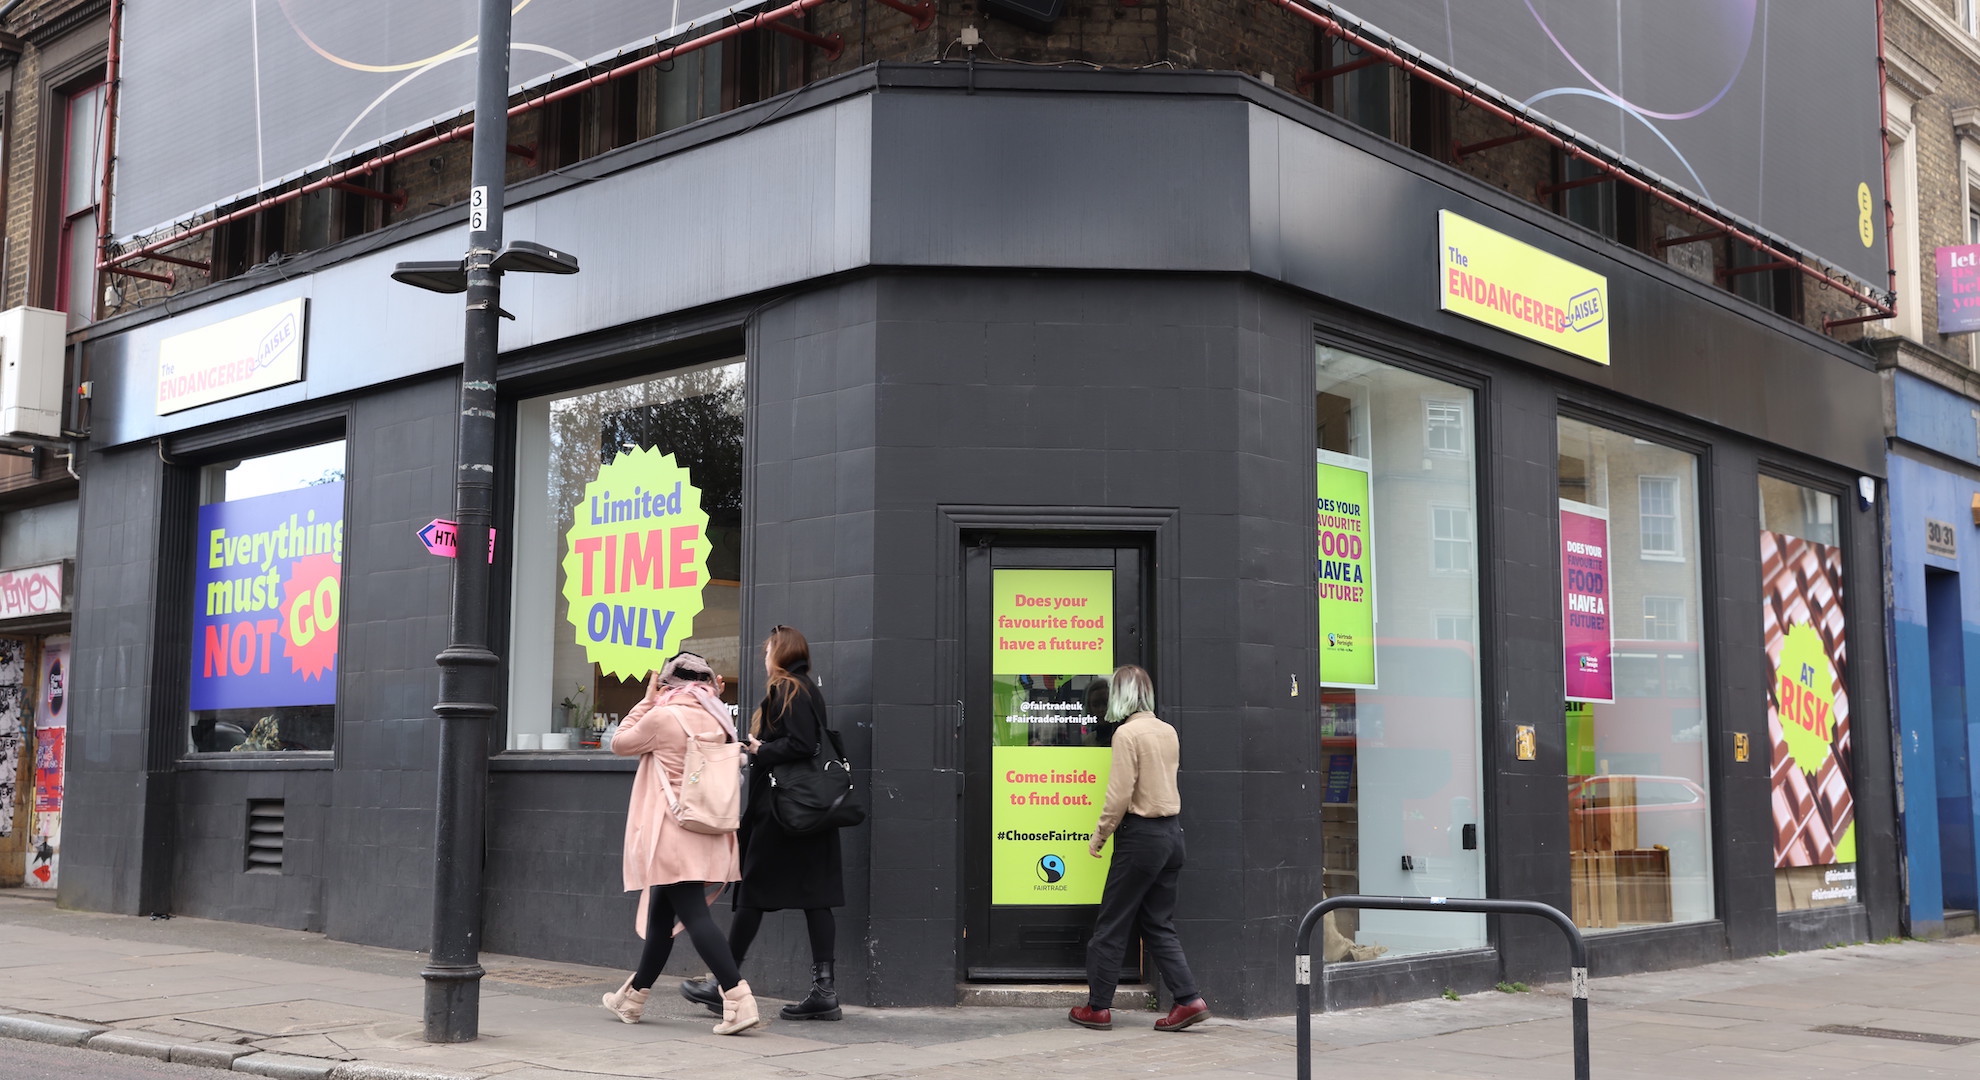 Fairtrade Endangered Aisle store front in Shoreditch